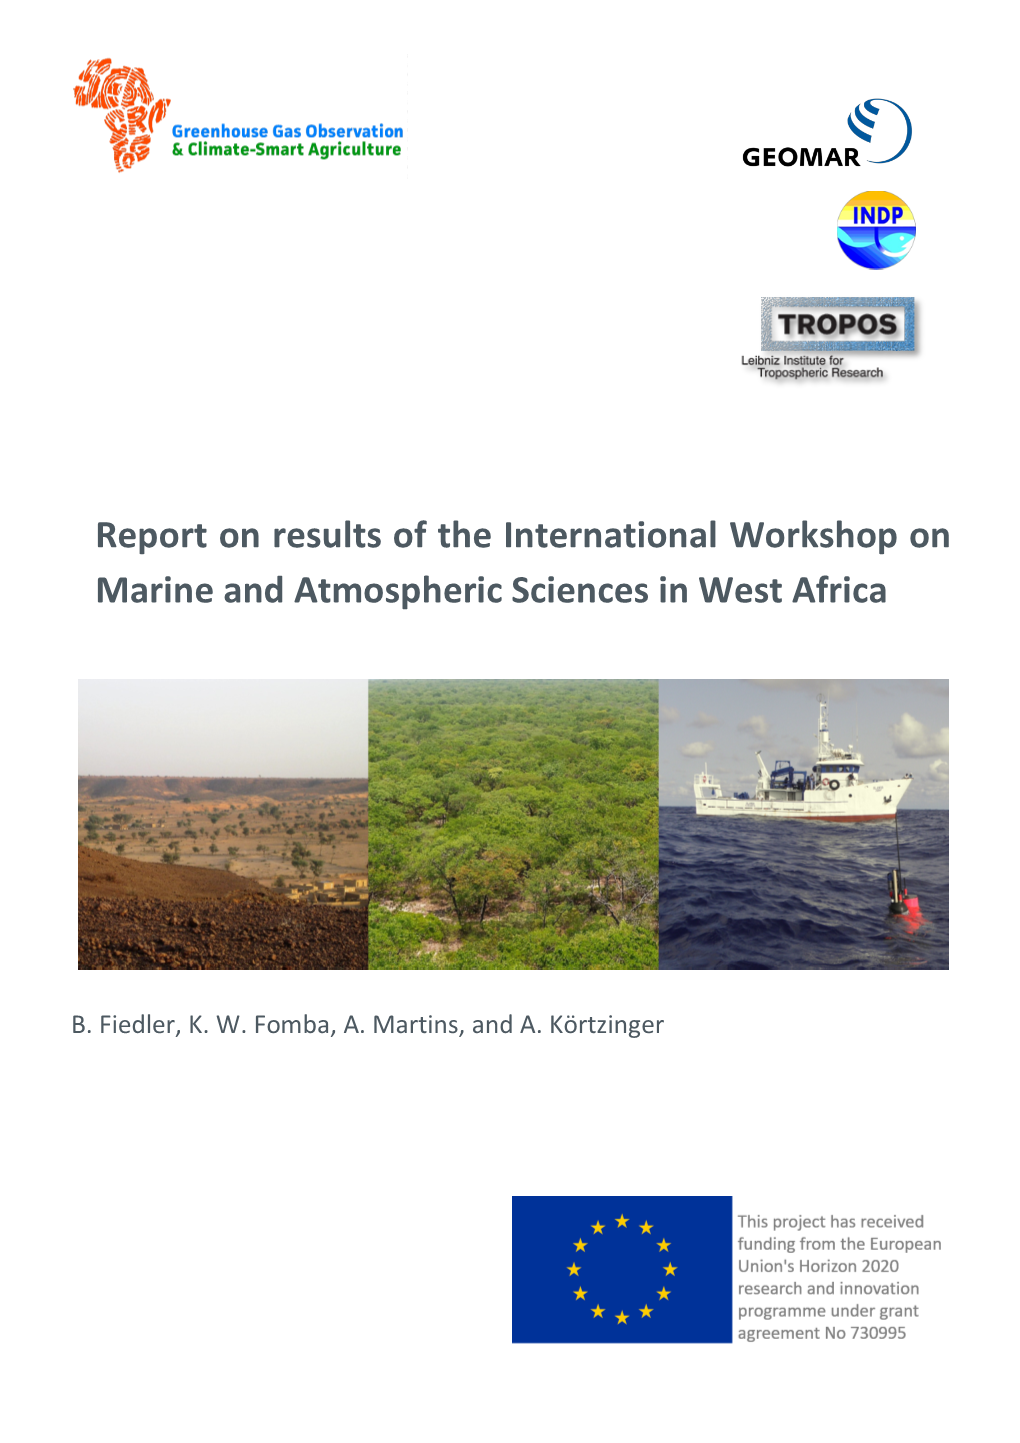 Report on Results of the International Workshop on Marine and Atmospheric Sciences in West Africa